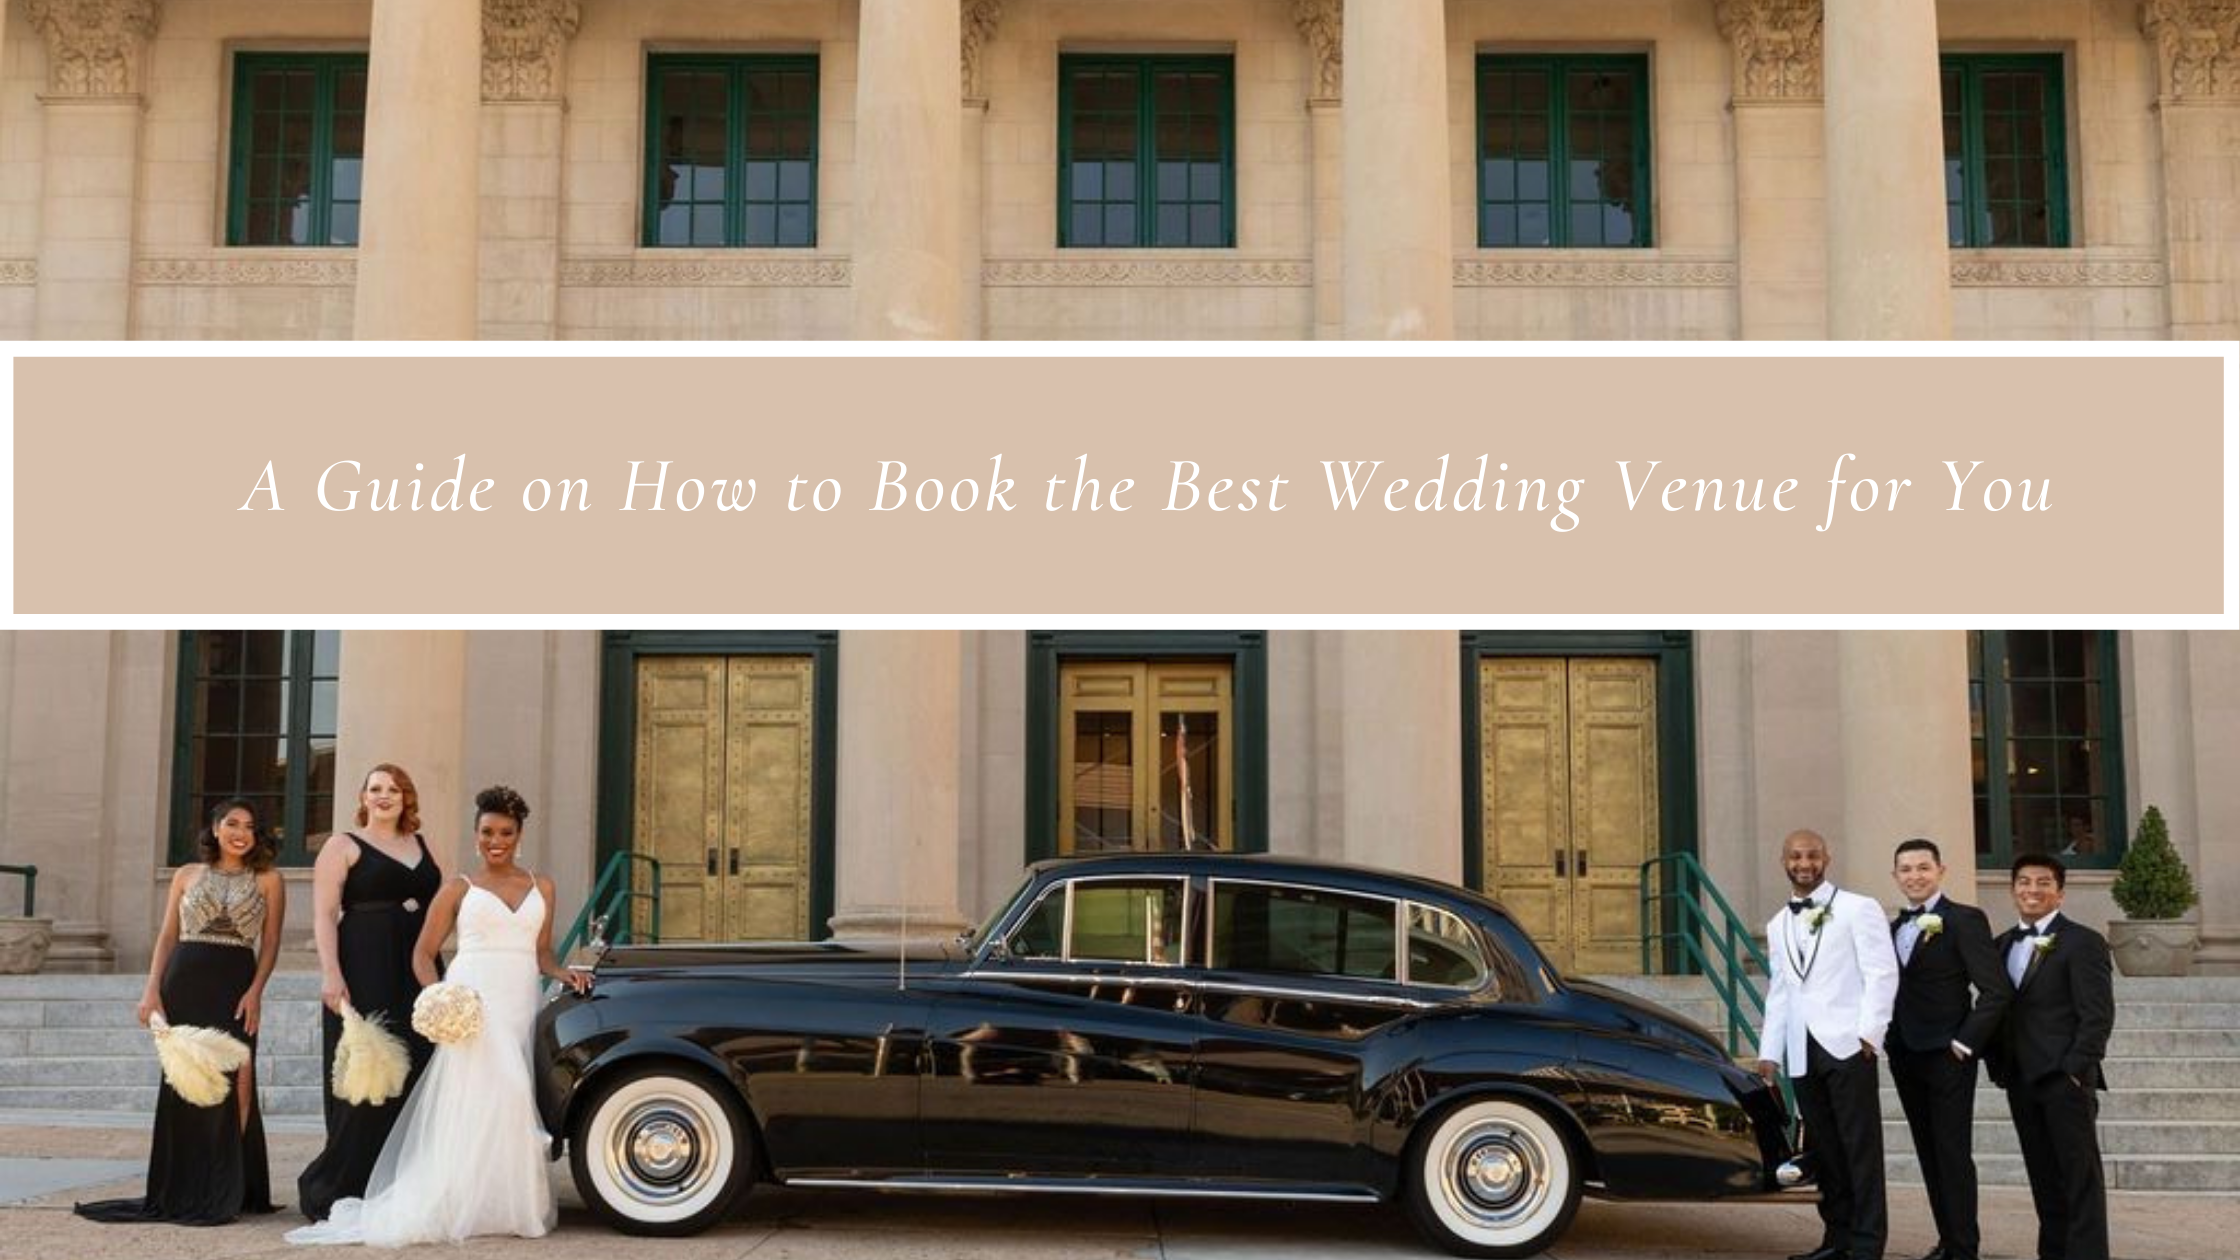 A Guide on How to Book the Best Wedding Venue for You